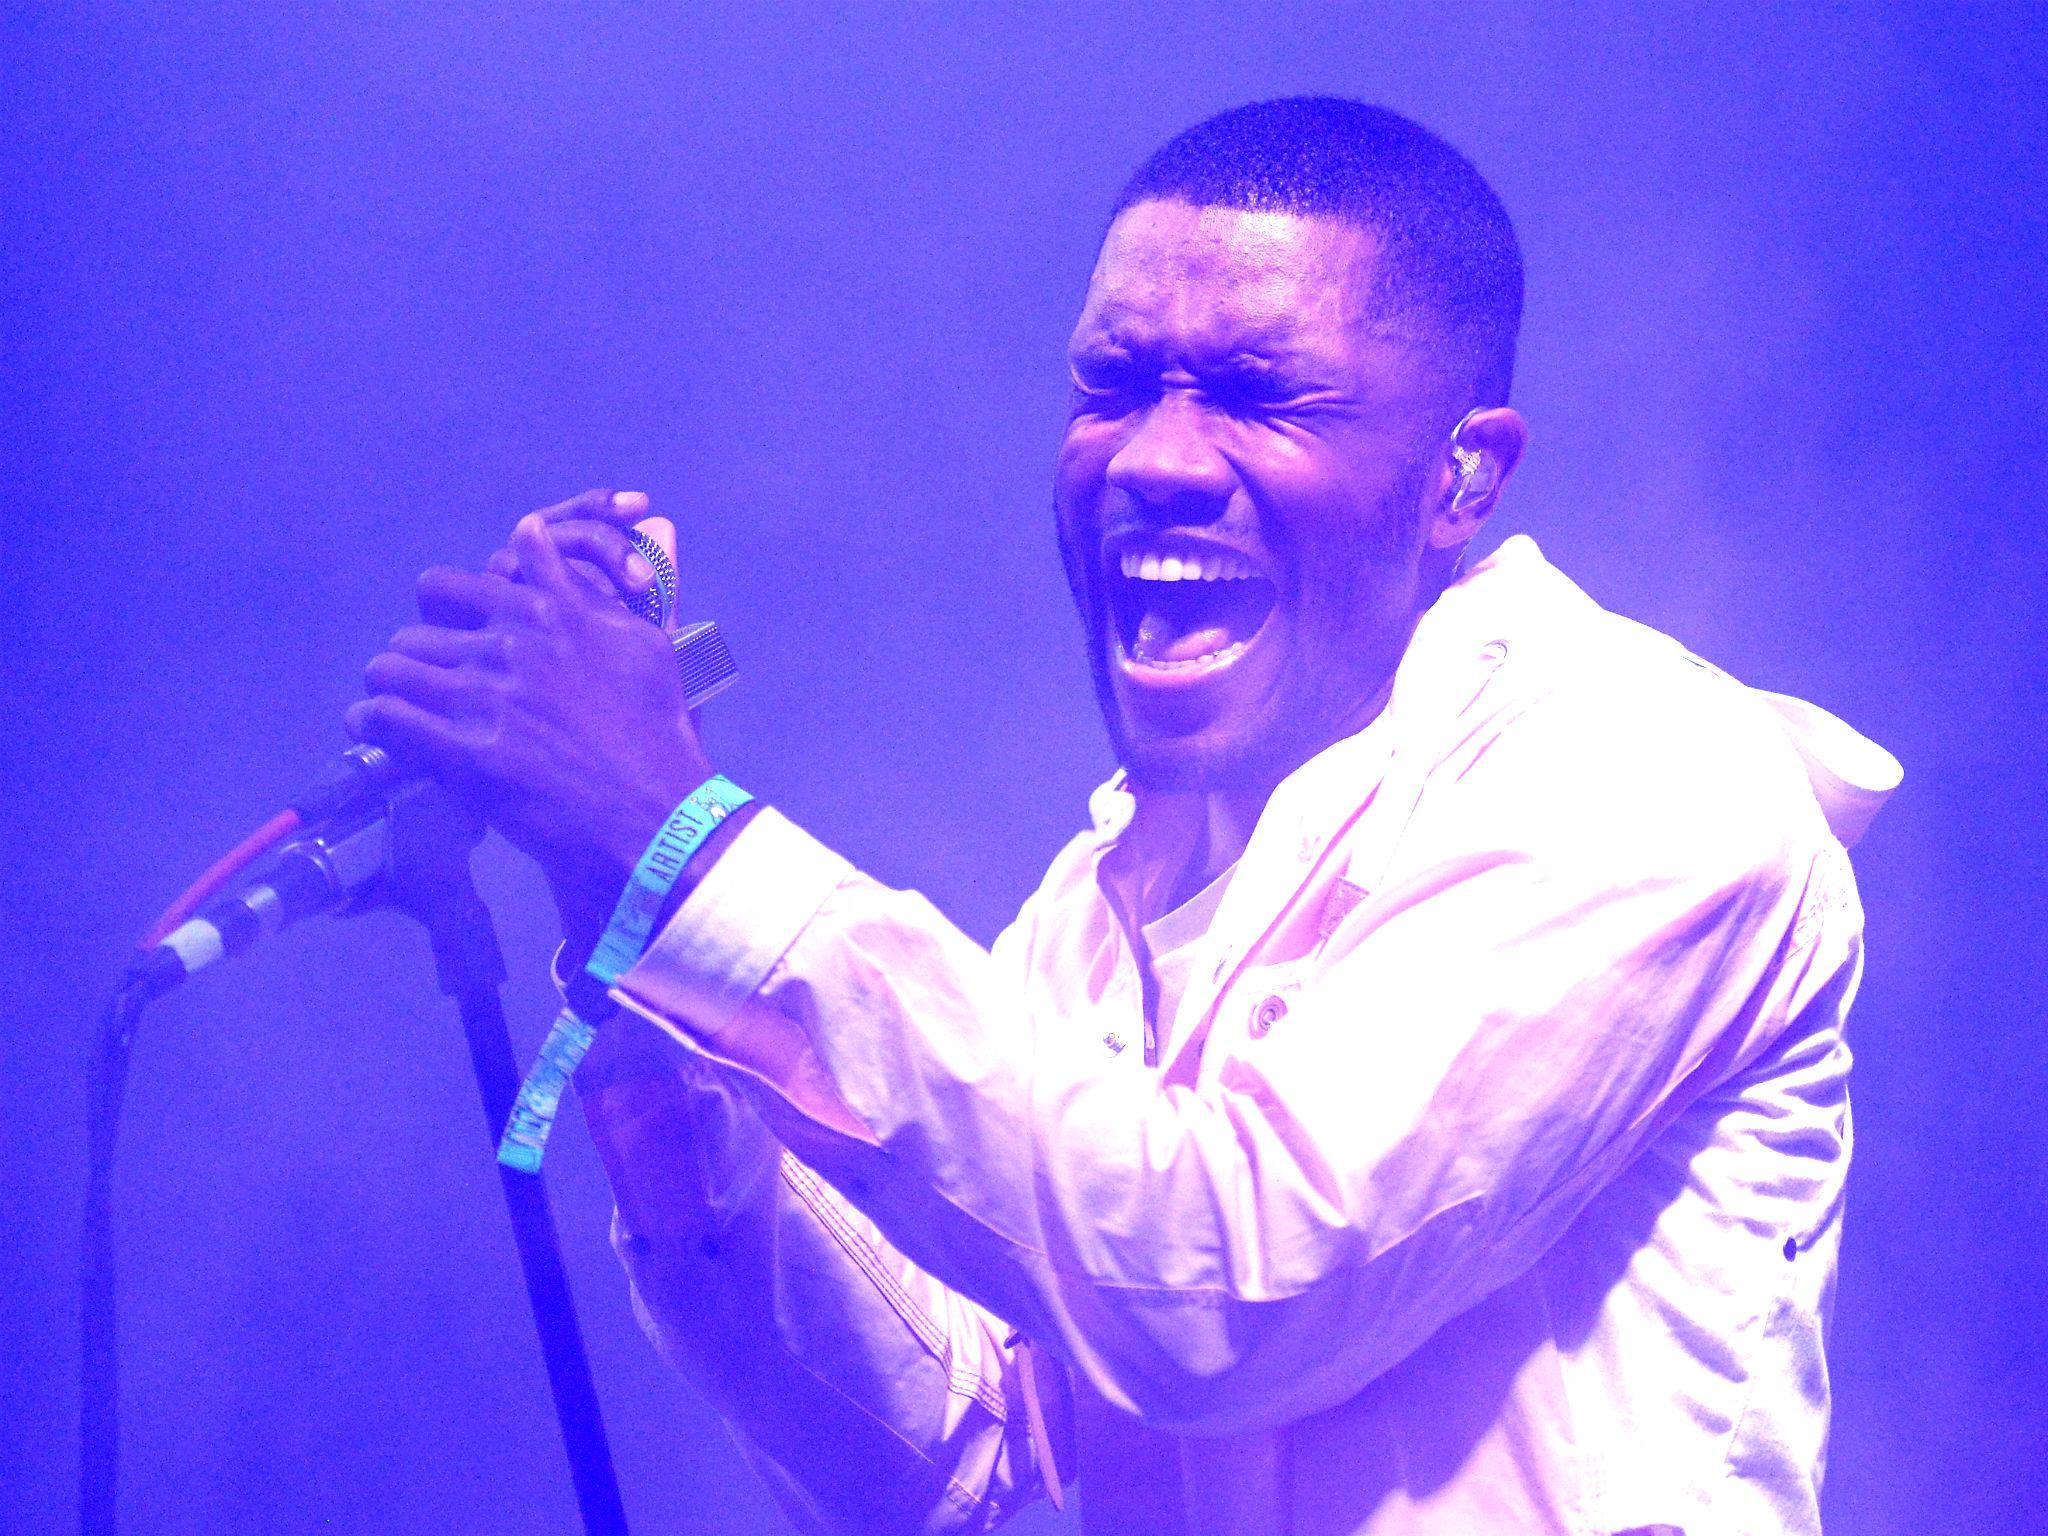 Some fans were pained when Frank Ocean released his new album ‘Blonde’ exclusively on Apple Music